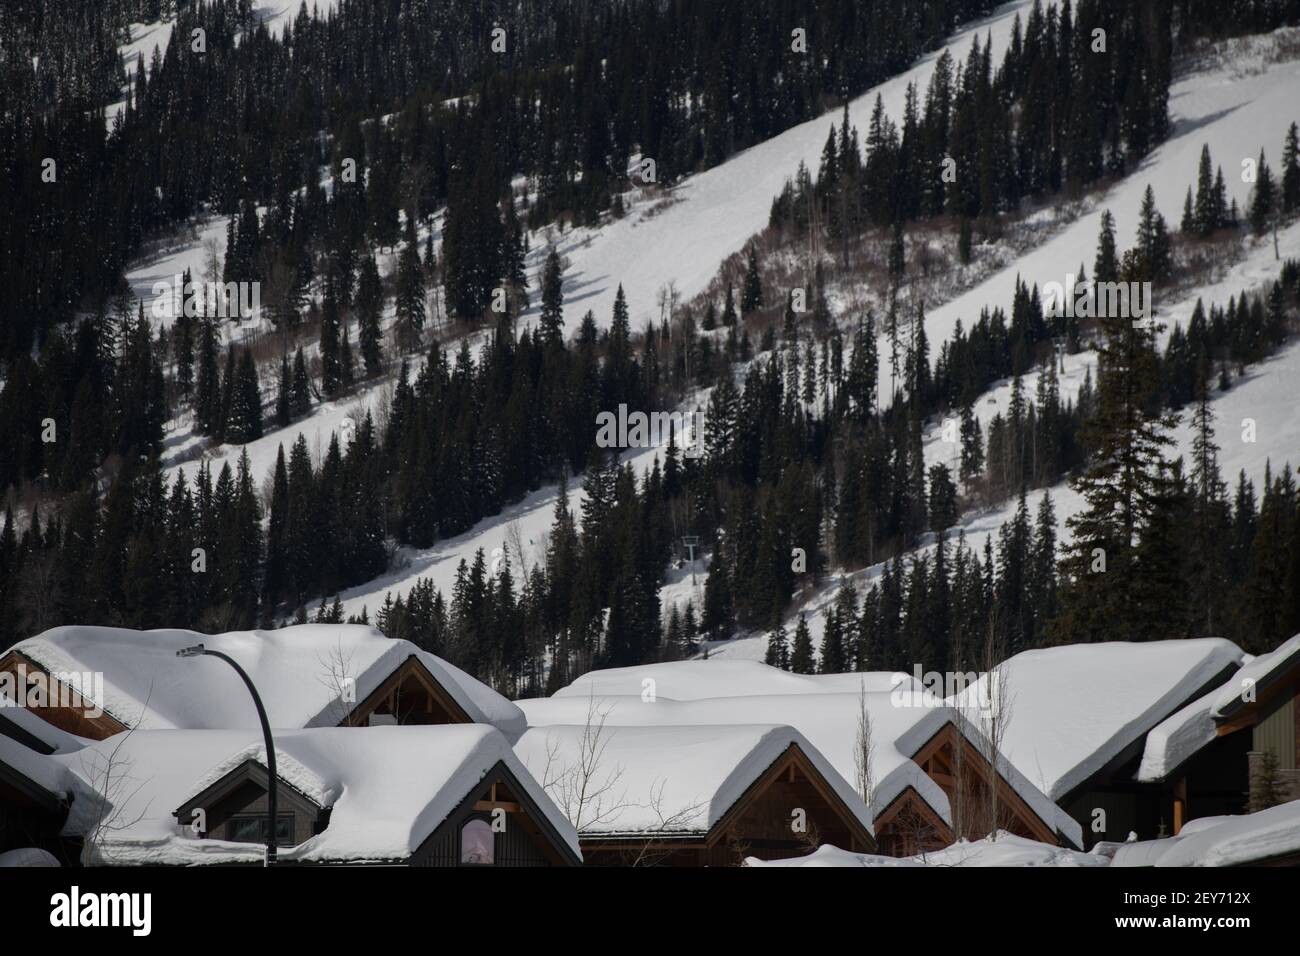 snow on roofs of ski chalets whit ski runs at ski resort in British Columbia in background horizontal format room for type triangular shaped roof home Stock Photo